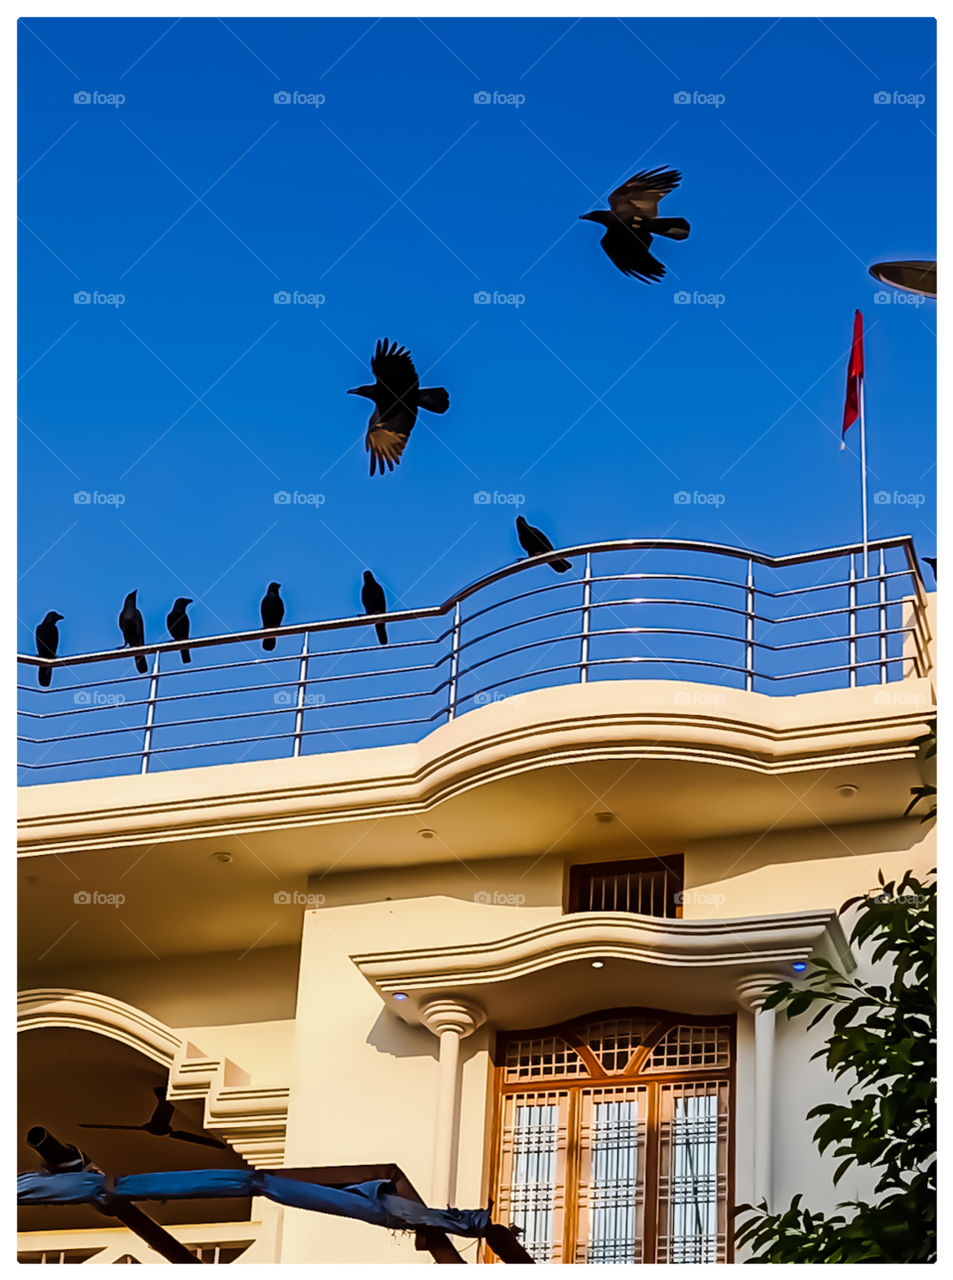 Crows flying on a beautiful building nice looking image